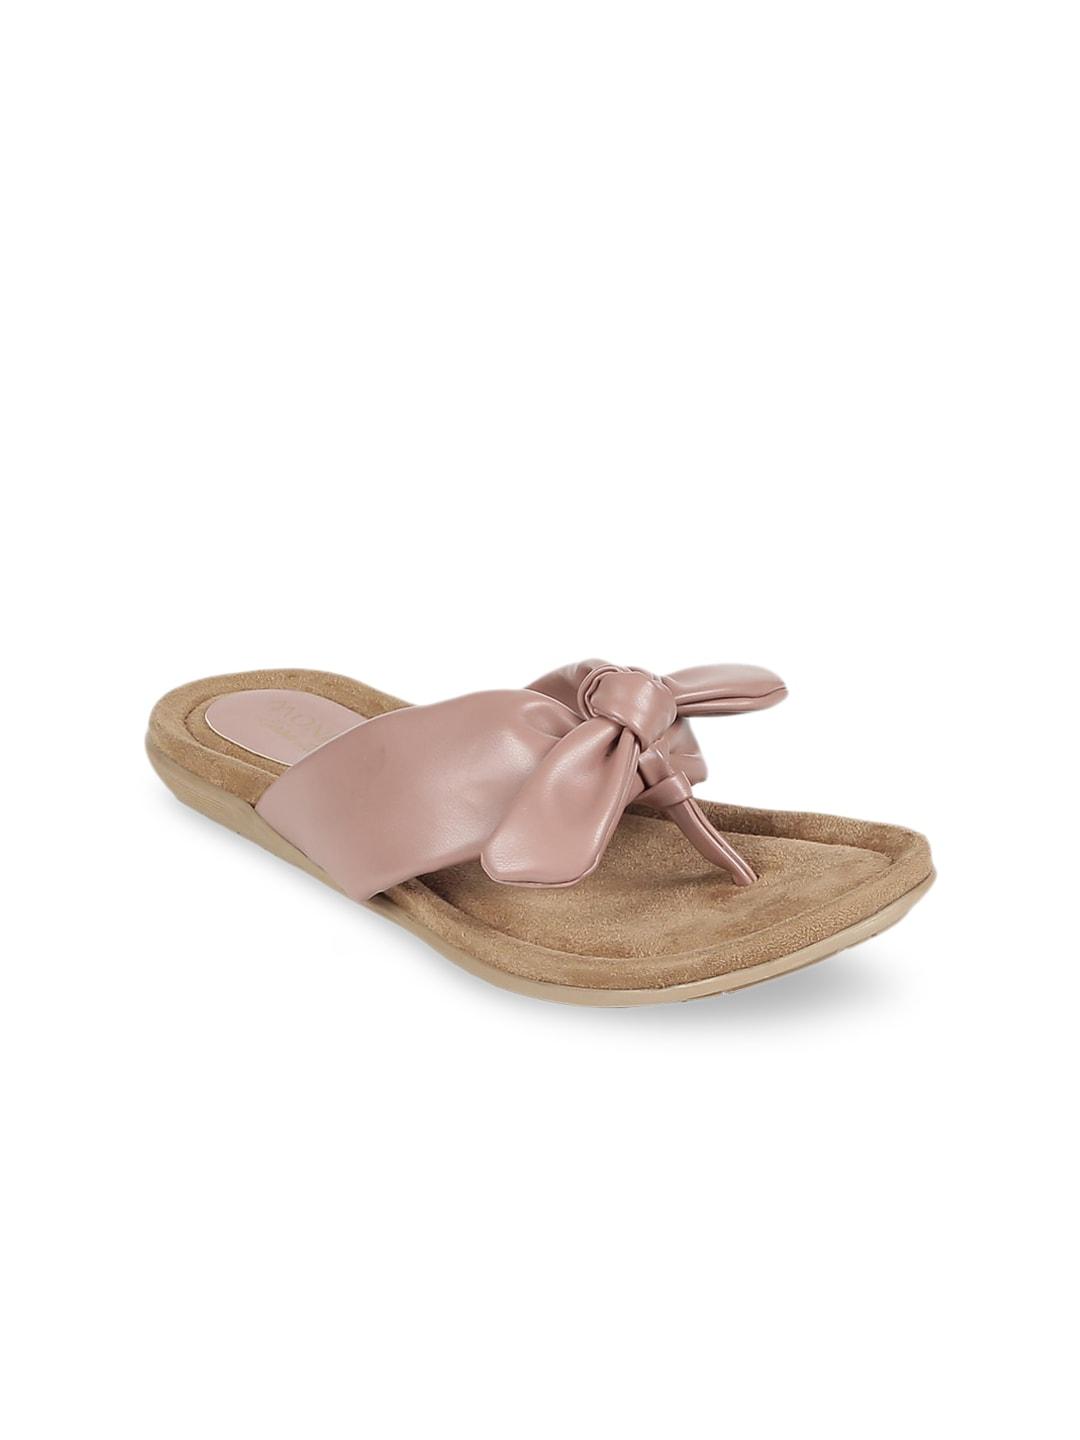 Monrow Women Pink Solid T-Strap Flats with Bows